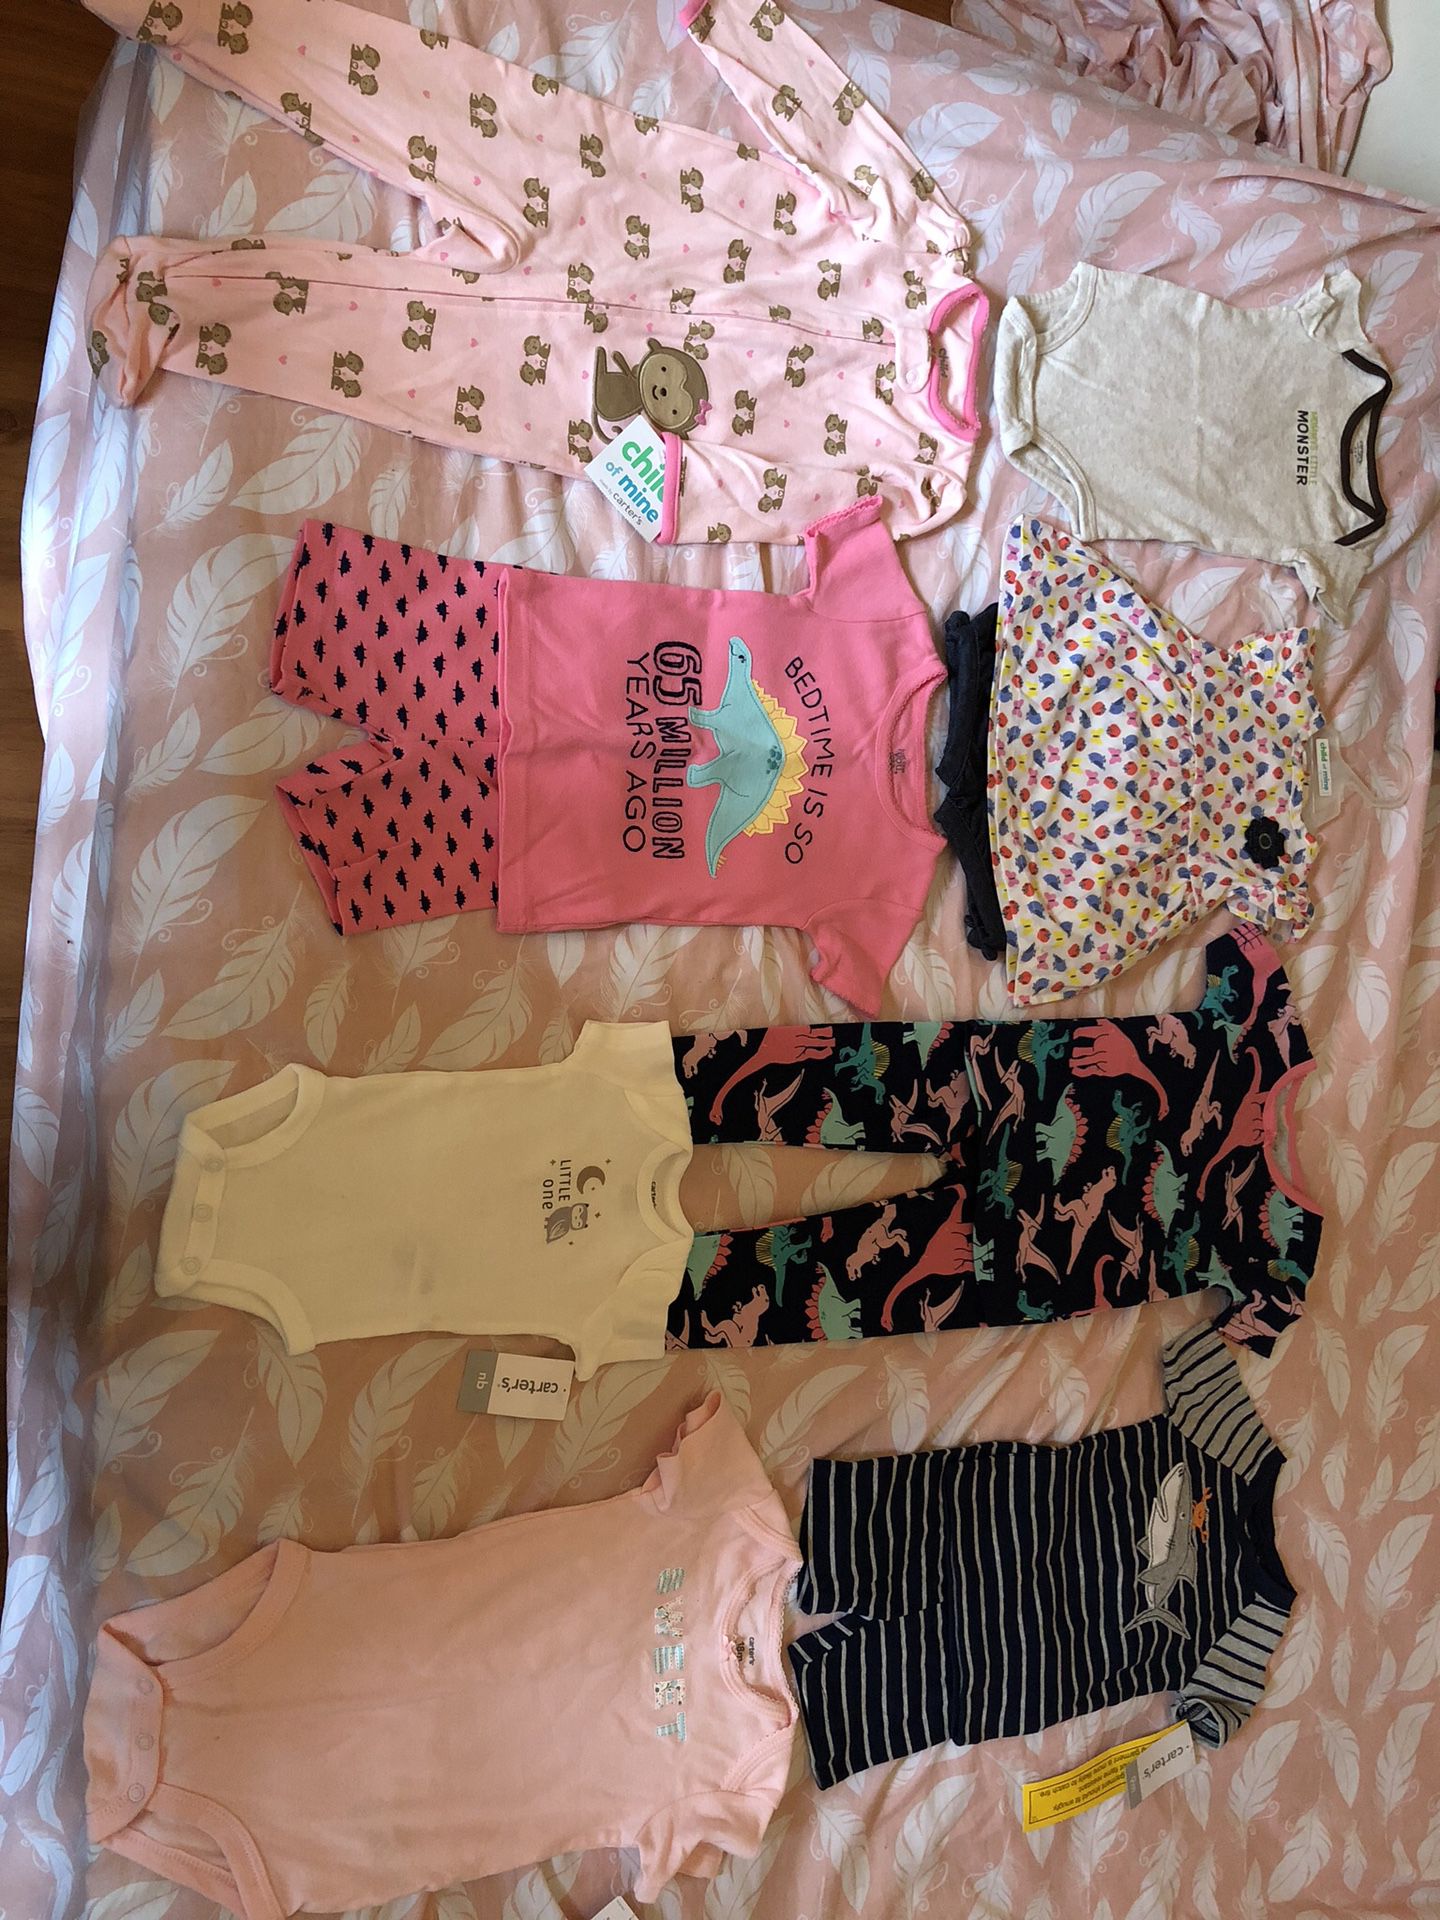 Baby girl clothes, some new some used, so clean